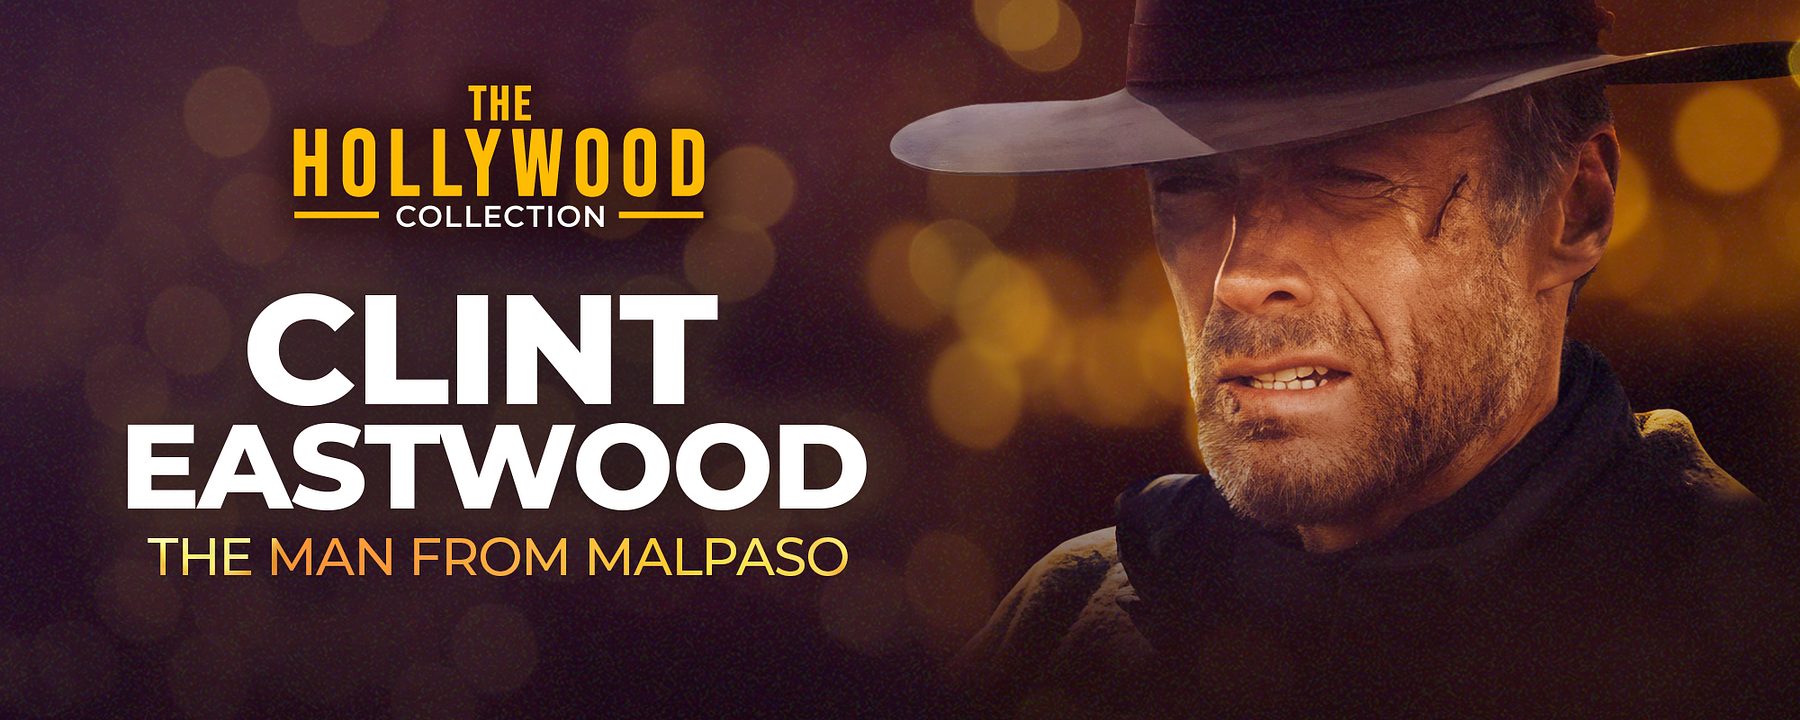 Hollywood Collection Clint Eastwood 2000x800